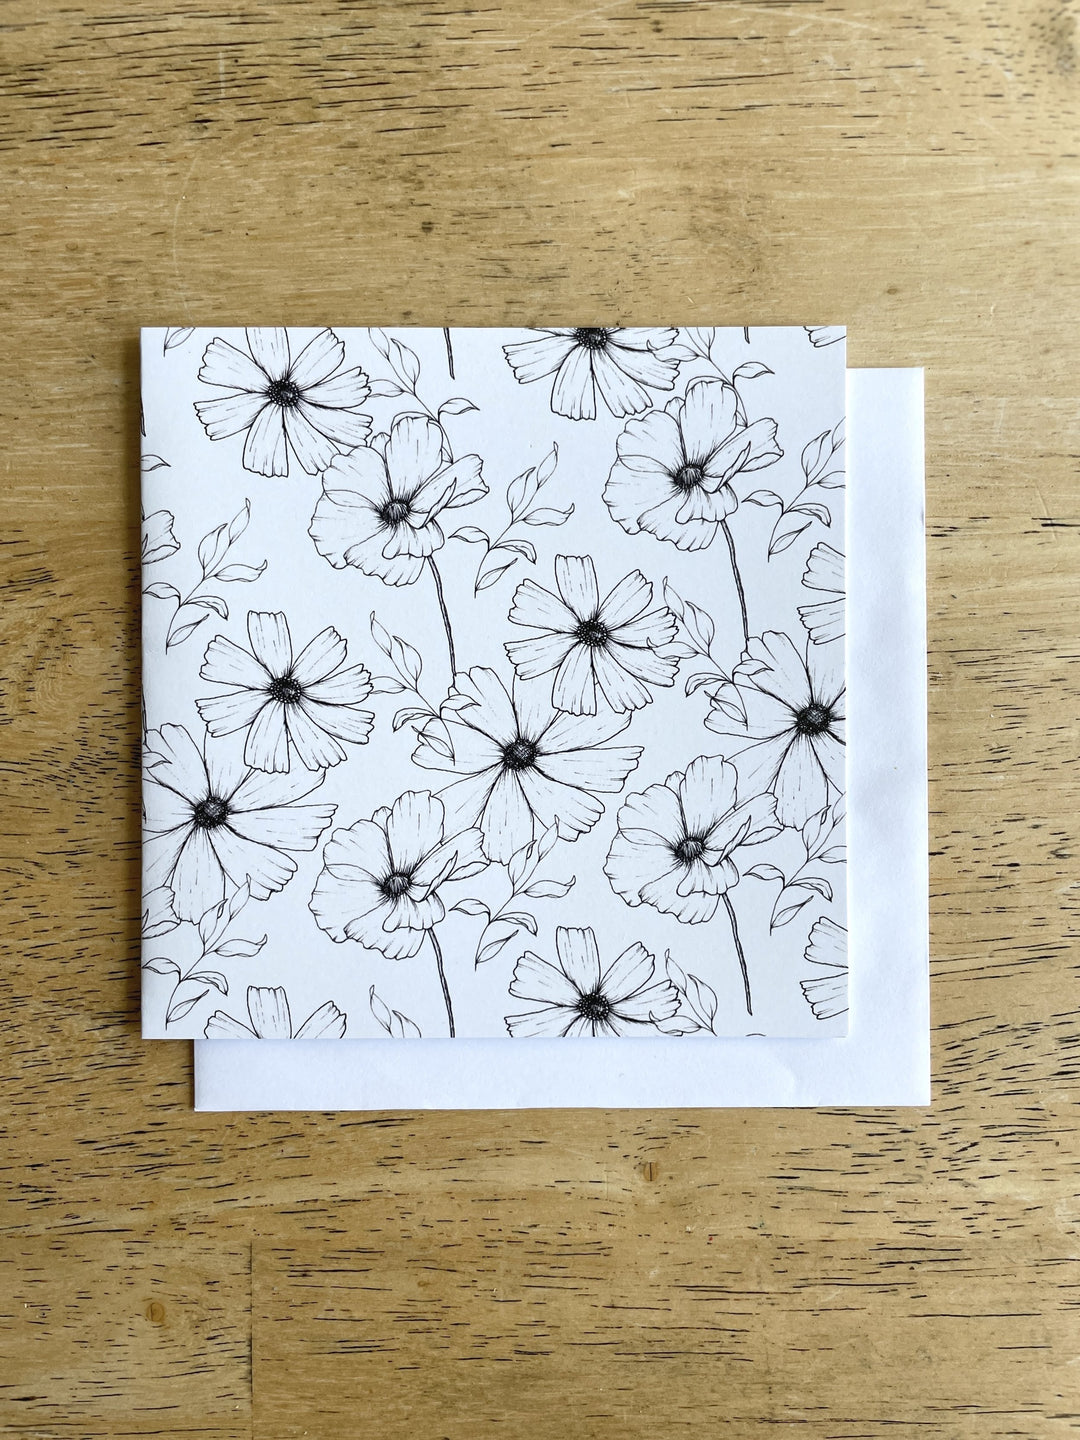 Square white greeting card showcase illustrations of black and white cosmo blooms in a delightful pattern.